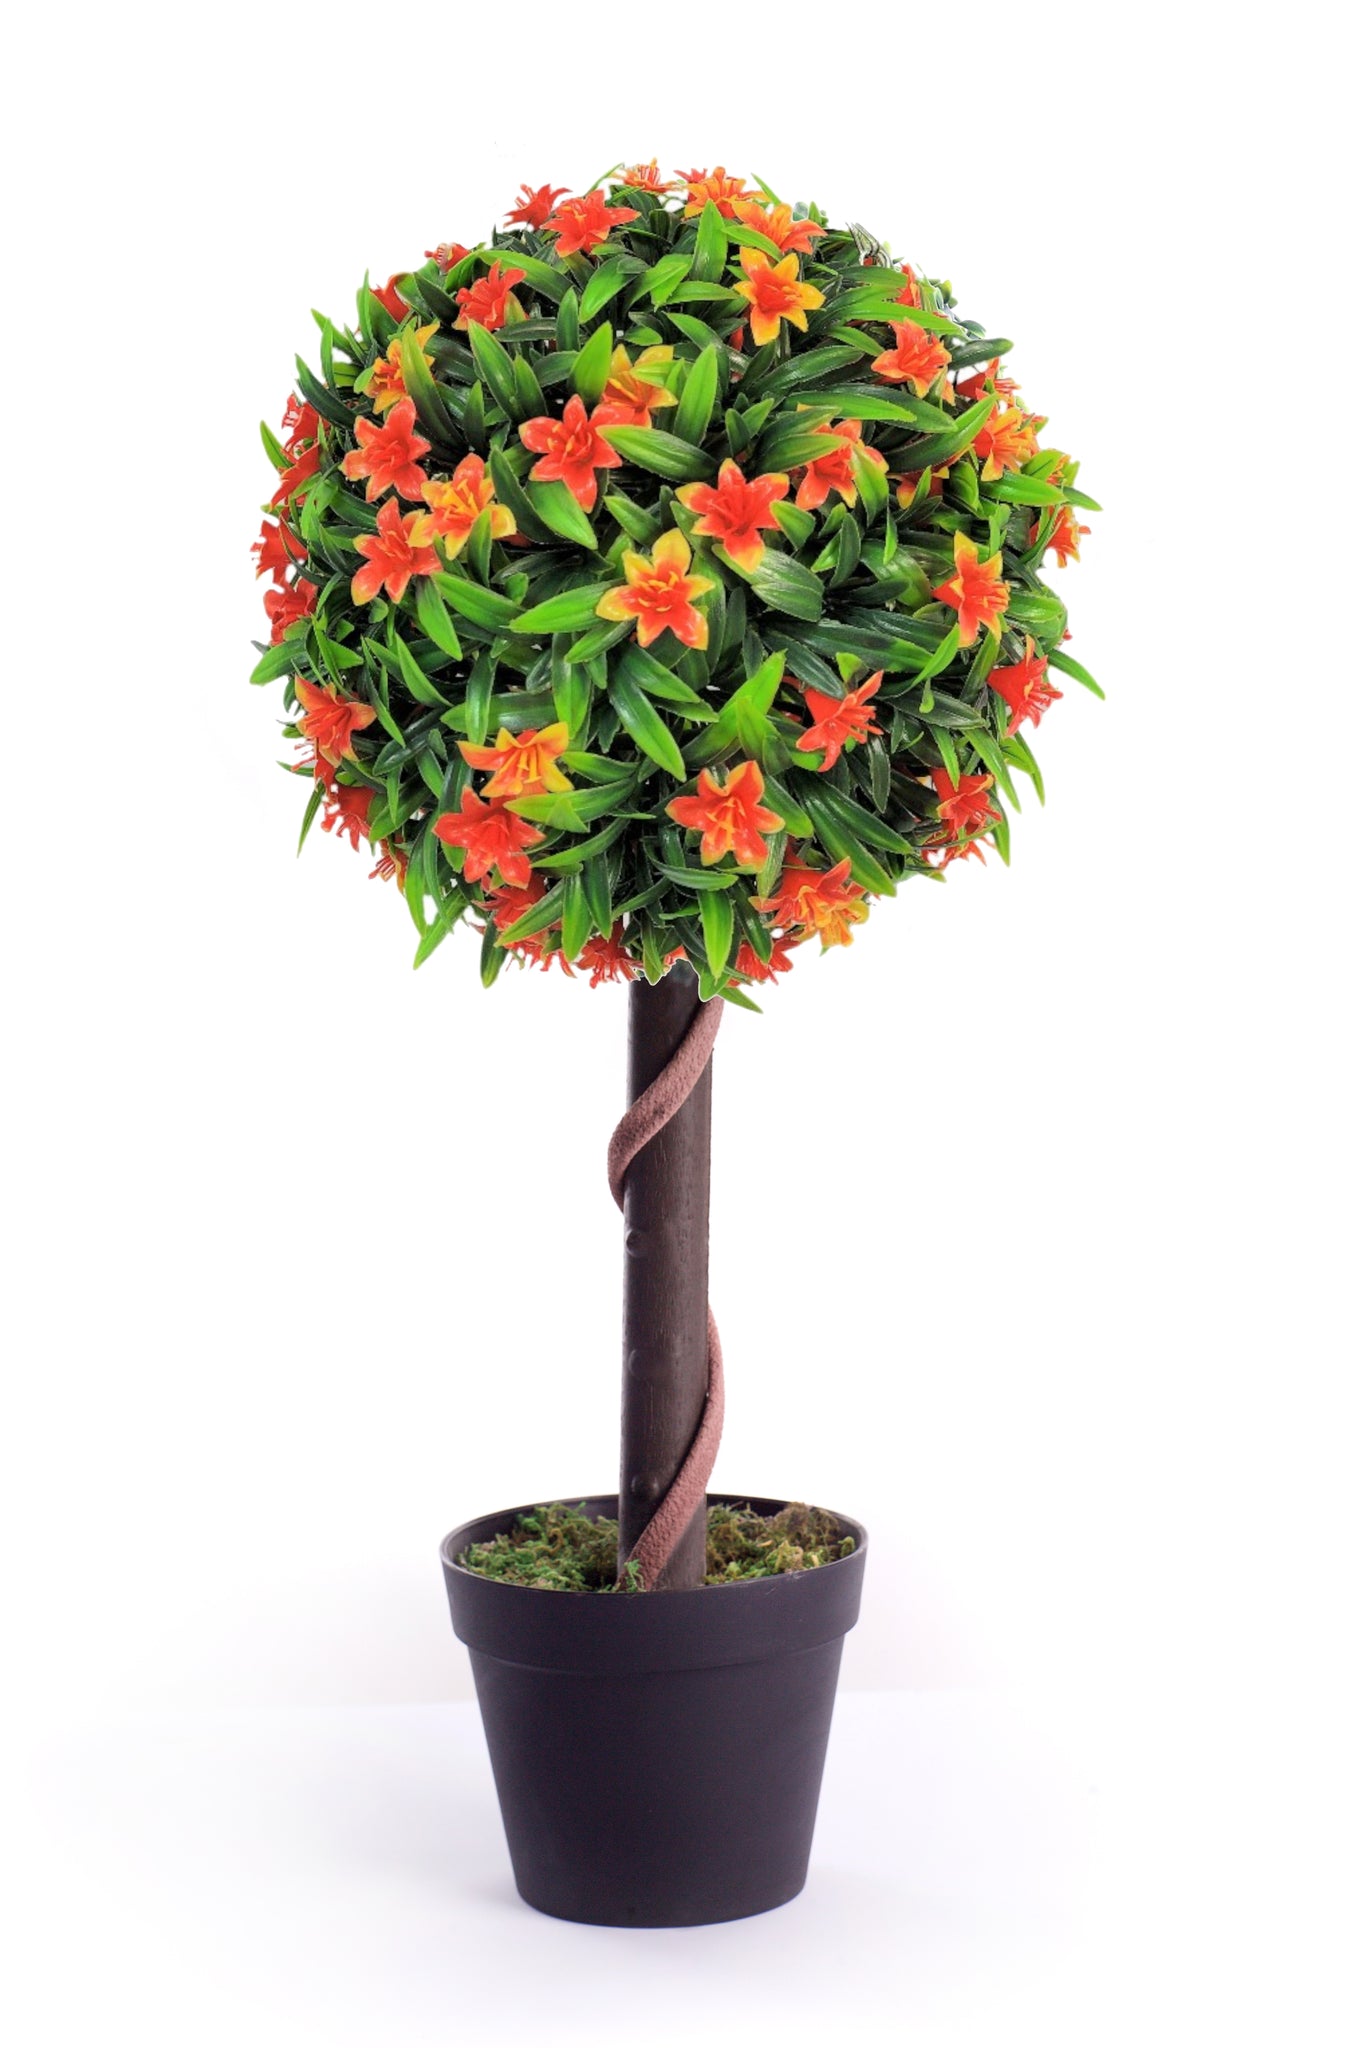 Best Artificial 2ft - 60cm Lily Ball Tree